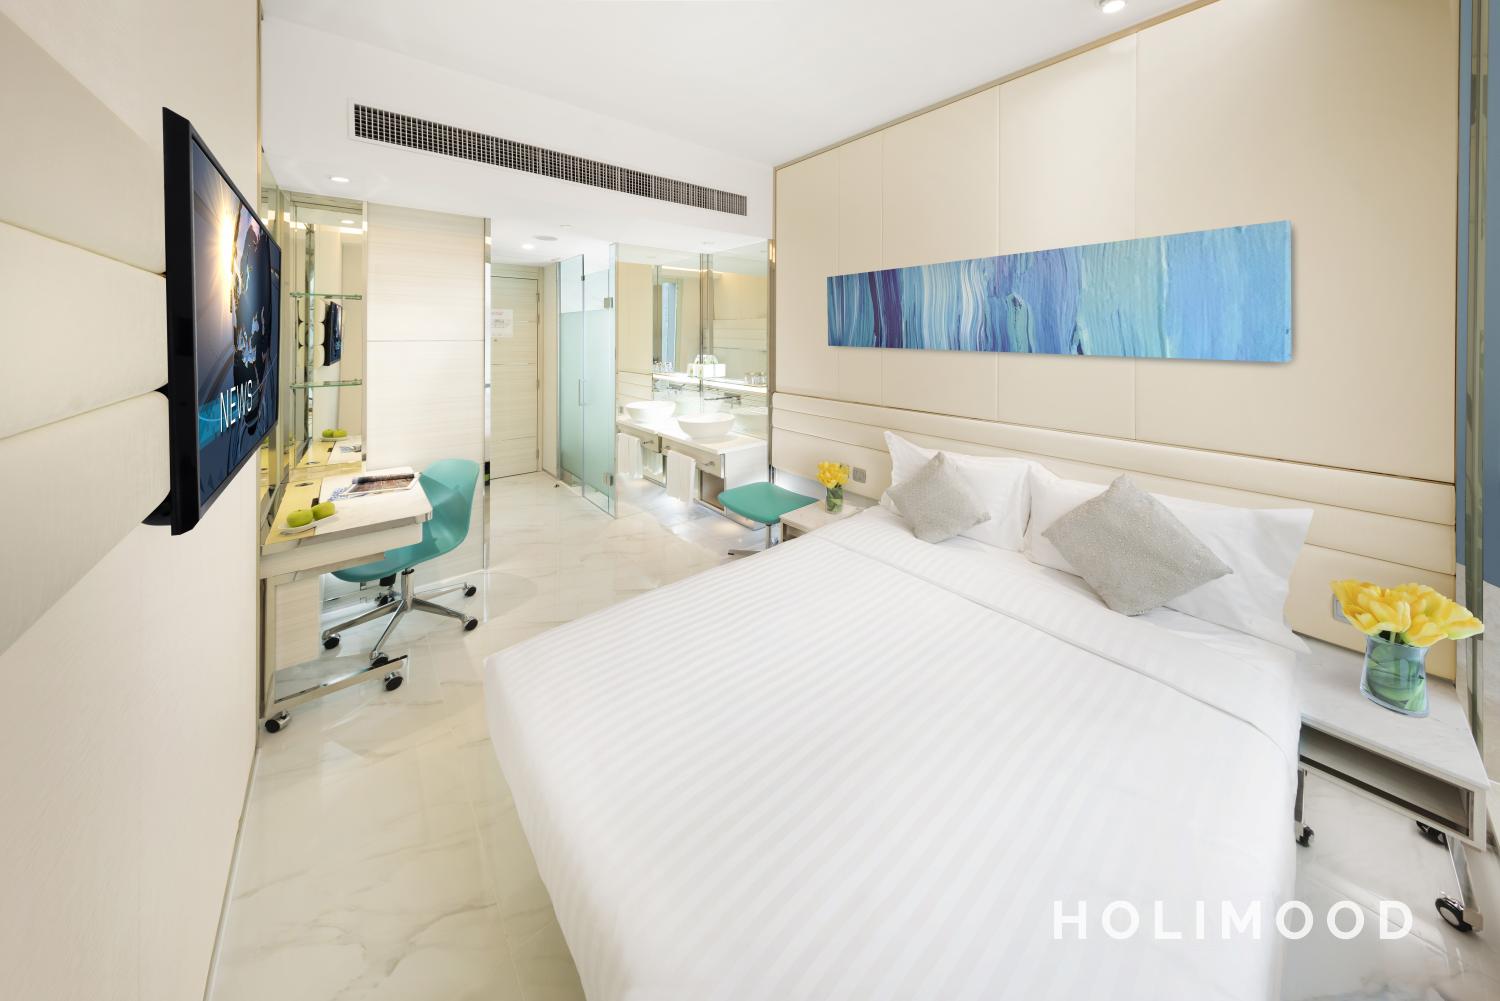 iclub Mong Kok Hotel 【iGather Room Package】iSelect / iPlus Room + Continental Breakfast + Late Check-out until 2pm + Complimentary Usage of the Club House Facilities｜iclub Mong Kok Hotel 3